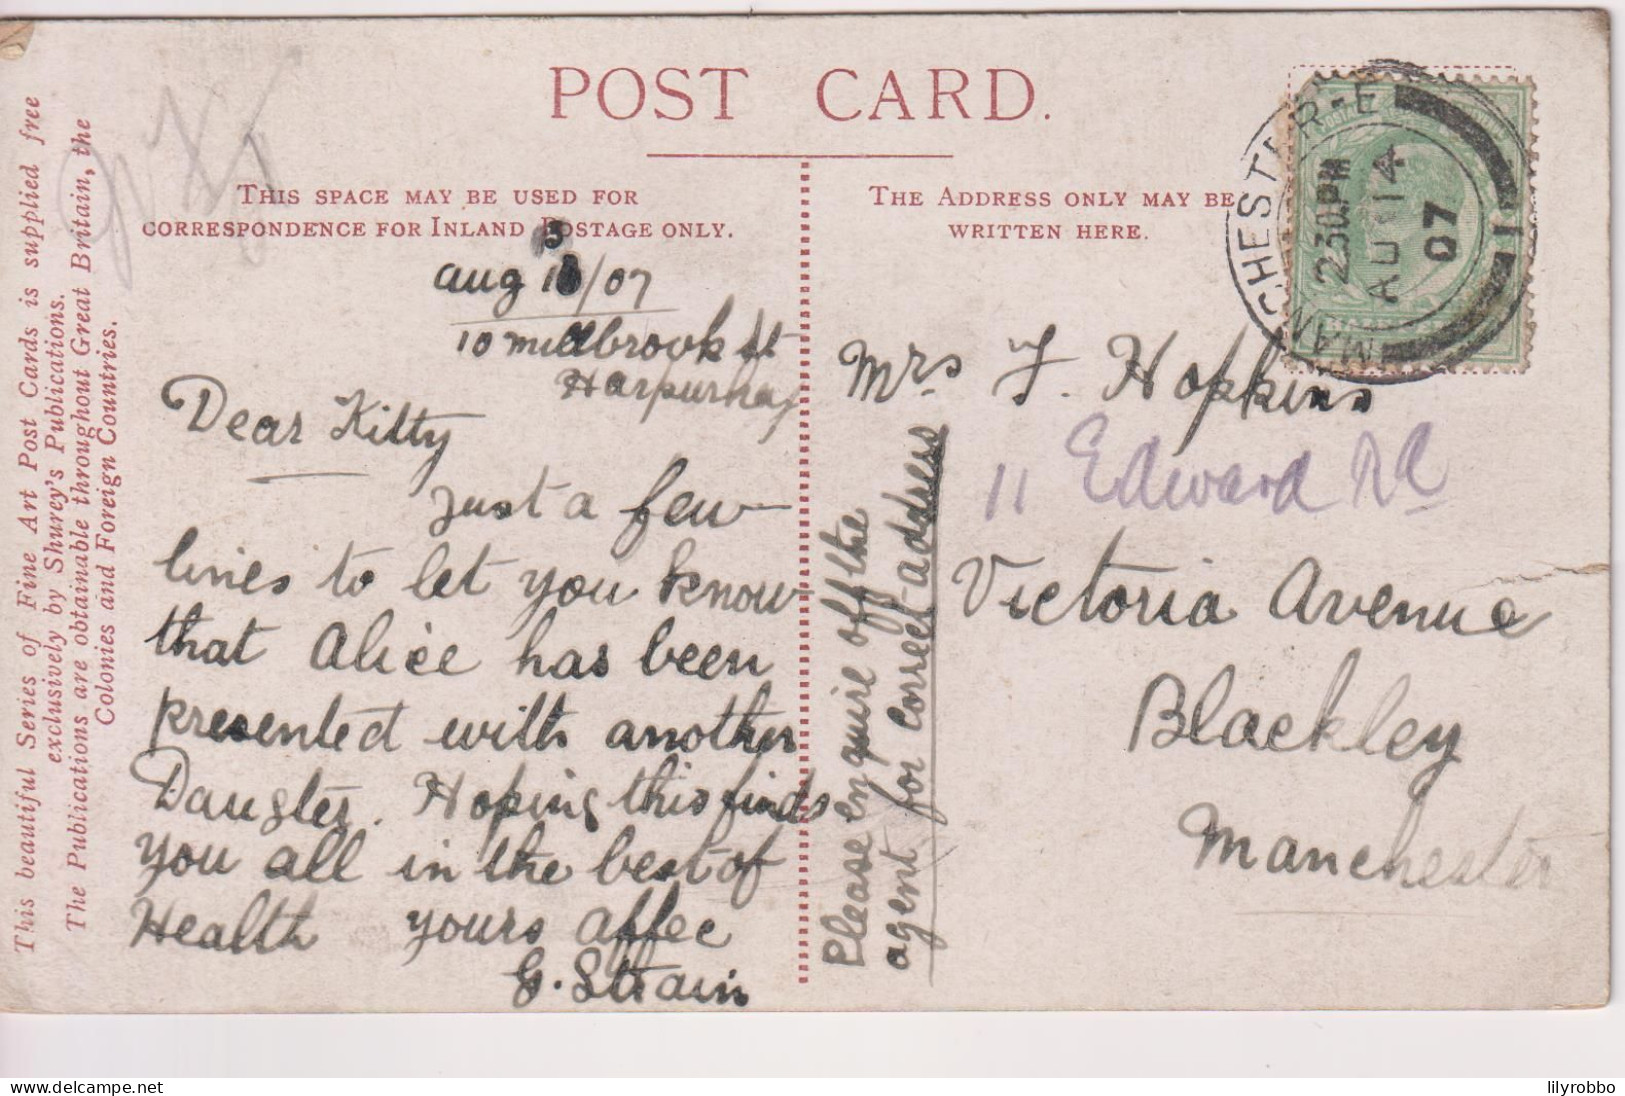 UK - Scotland - Forth (Railway) Bridge With Ferry In The Foreground Etc - Manchester UK Postmark 1907 - Obras De Arte